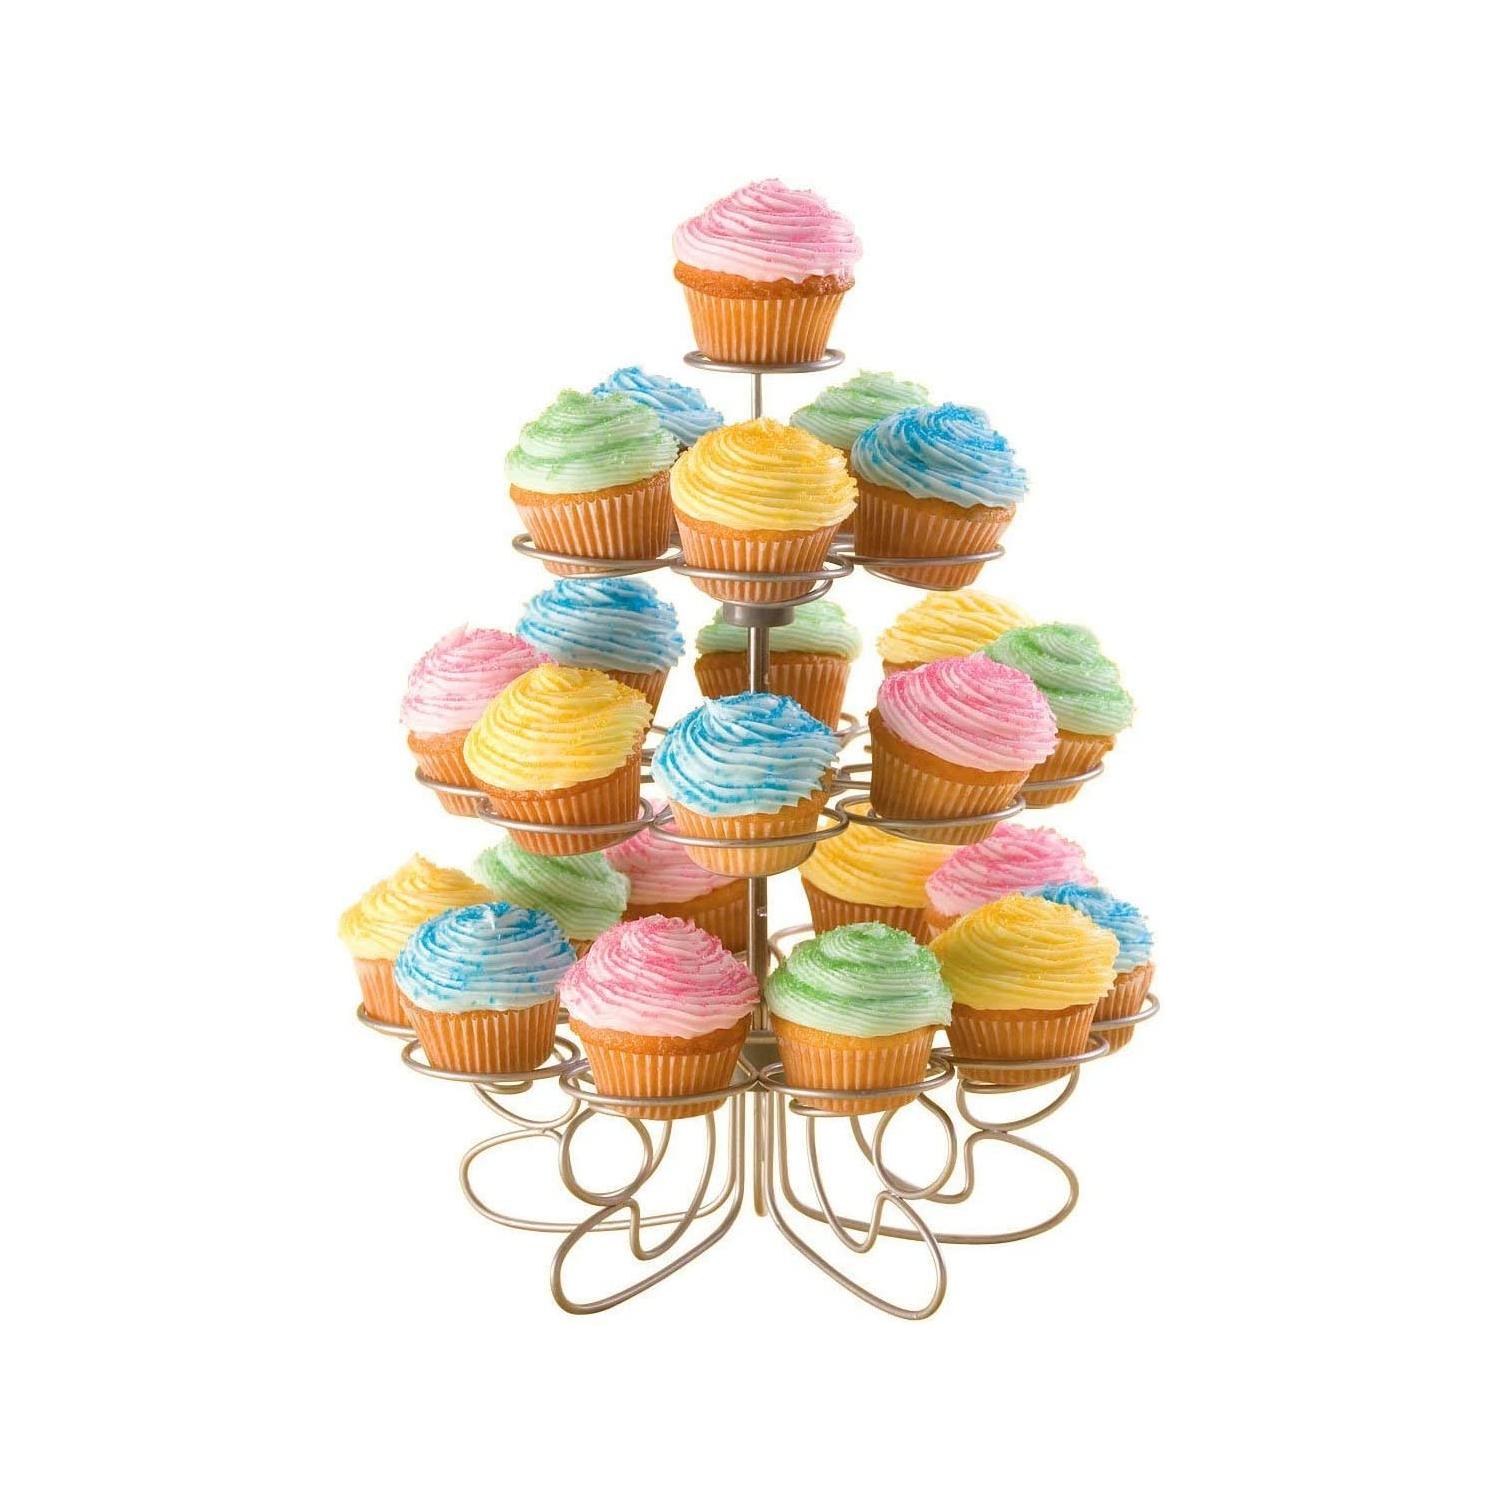 WILTON CUPCAKES 'N MORE 23 COUNT/4-TIER METAL DESSERT STAND